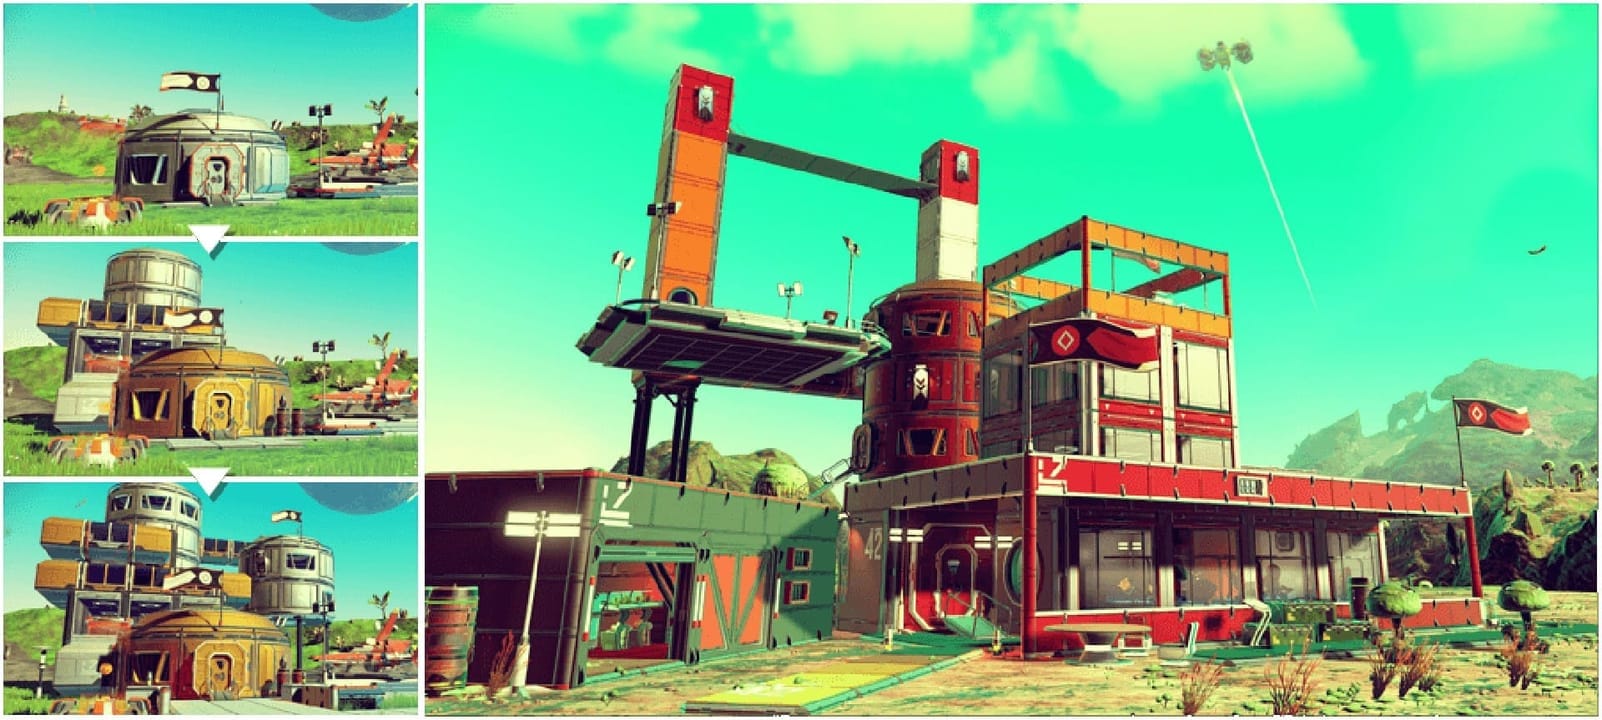 This is an example of how base building in No Man's Sky will work in the Foundation Update. It seems pretty likely that you'll be restricted to building on pre-existing uninhabited bases, but there also seems to be a lot of opportunity for customization.